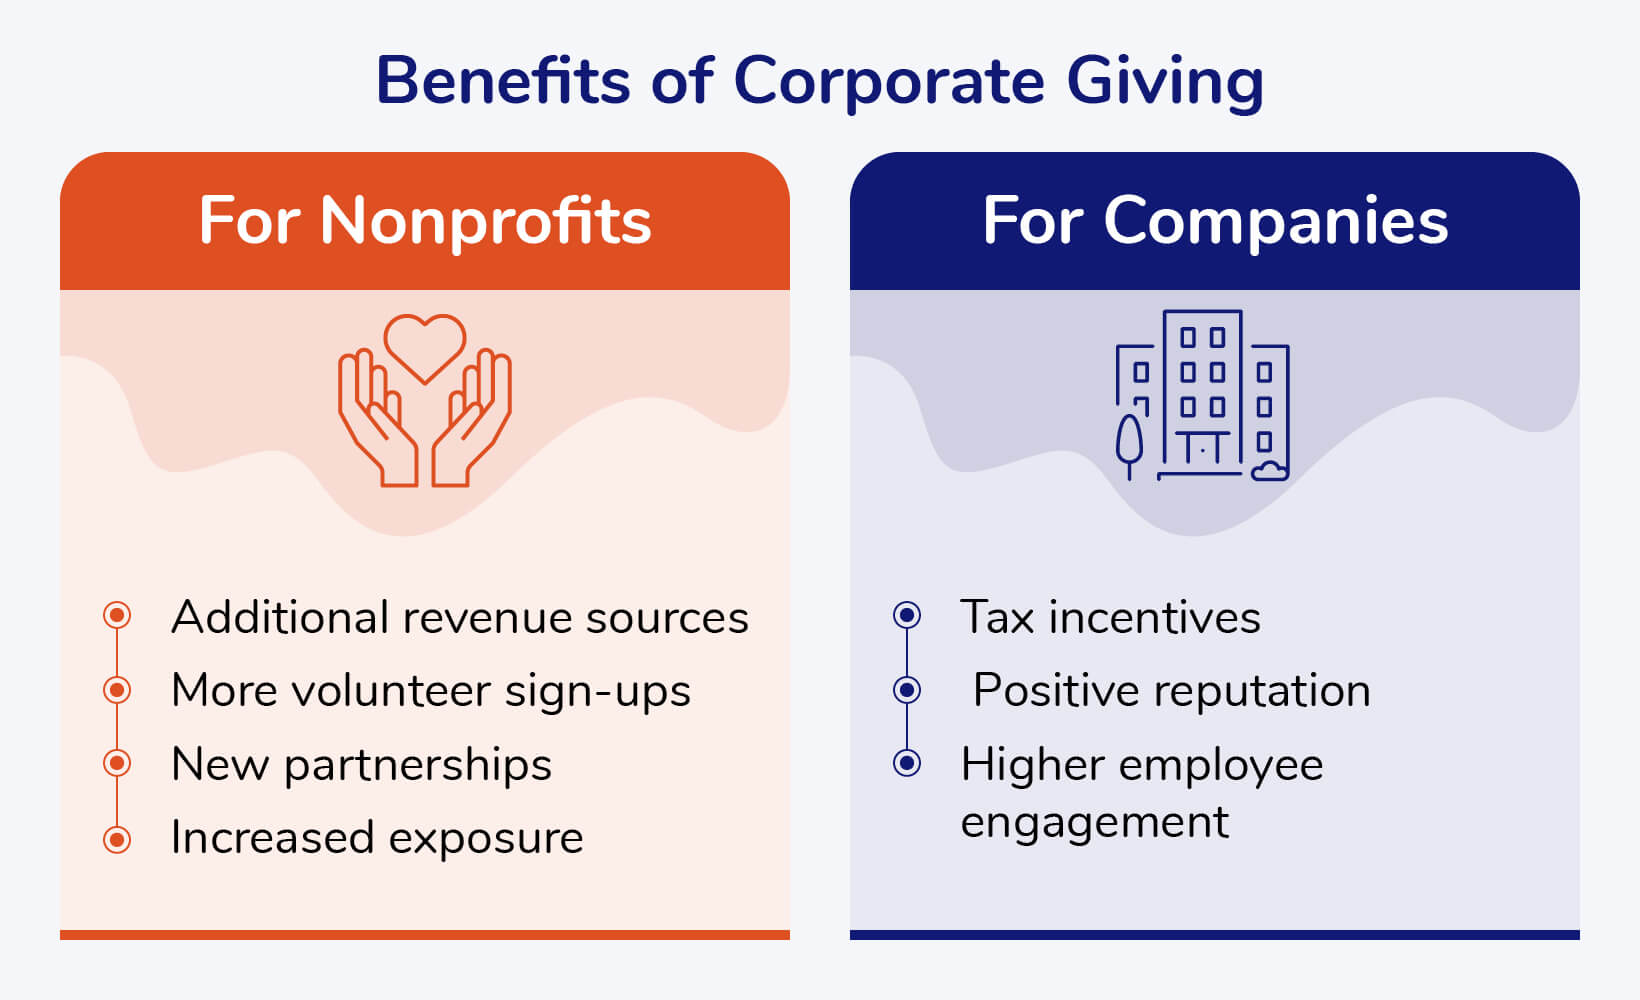 This image shows the benefits of corporate giving for nonprofits and companies, as outlined in the text below.